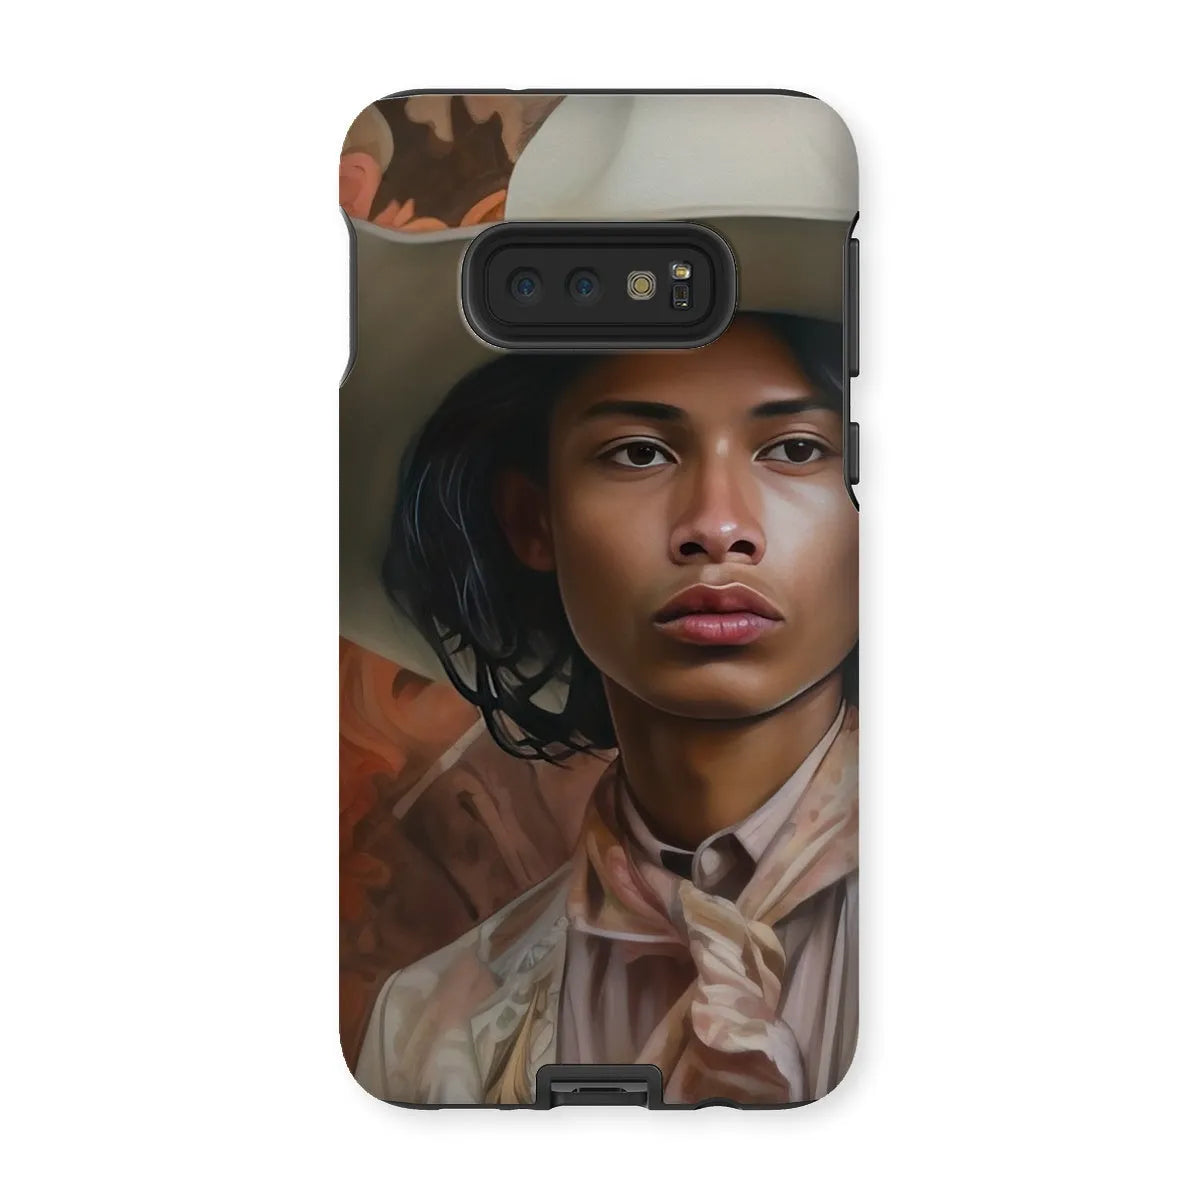 Arjuna The Gay Cowboy - Gay Aesthetic Art Phone Case - Samsung Galaxy S10e / Matte - Mobile Phone Cases - Aesthetic Art